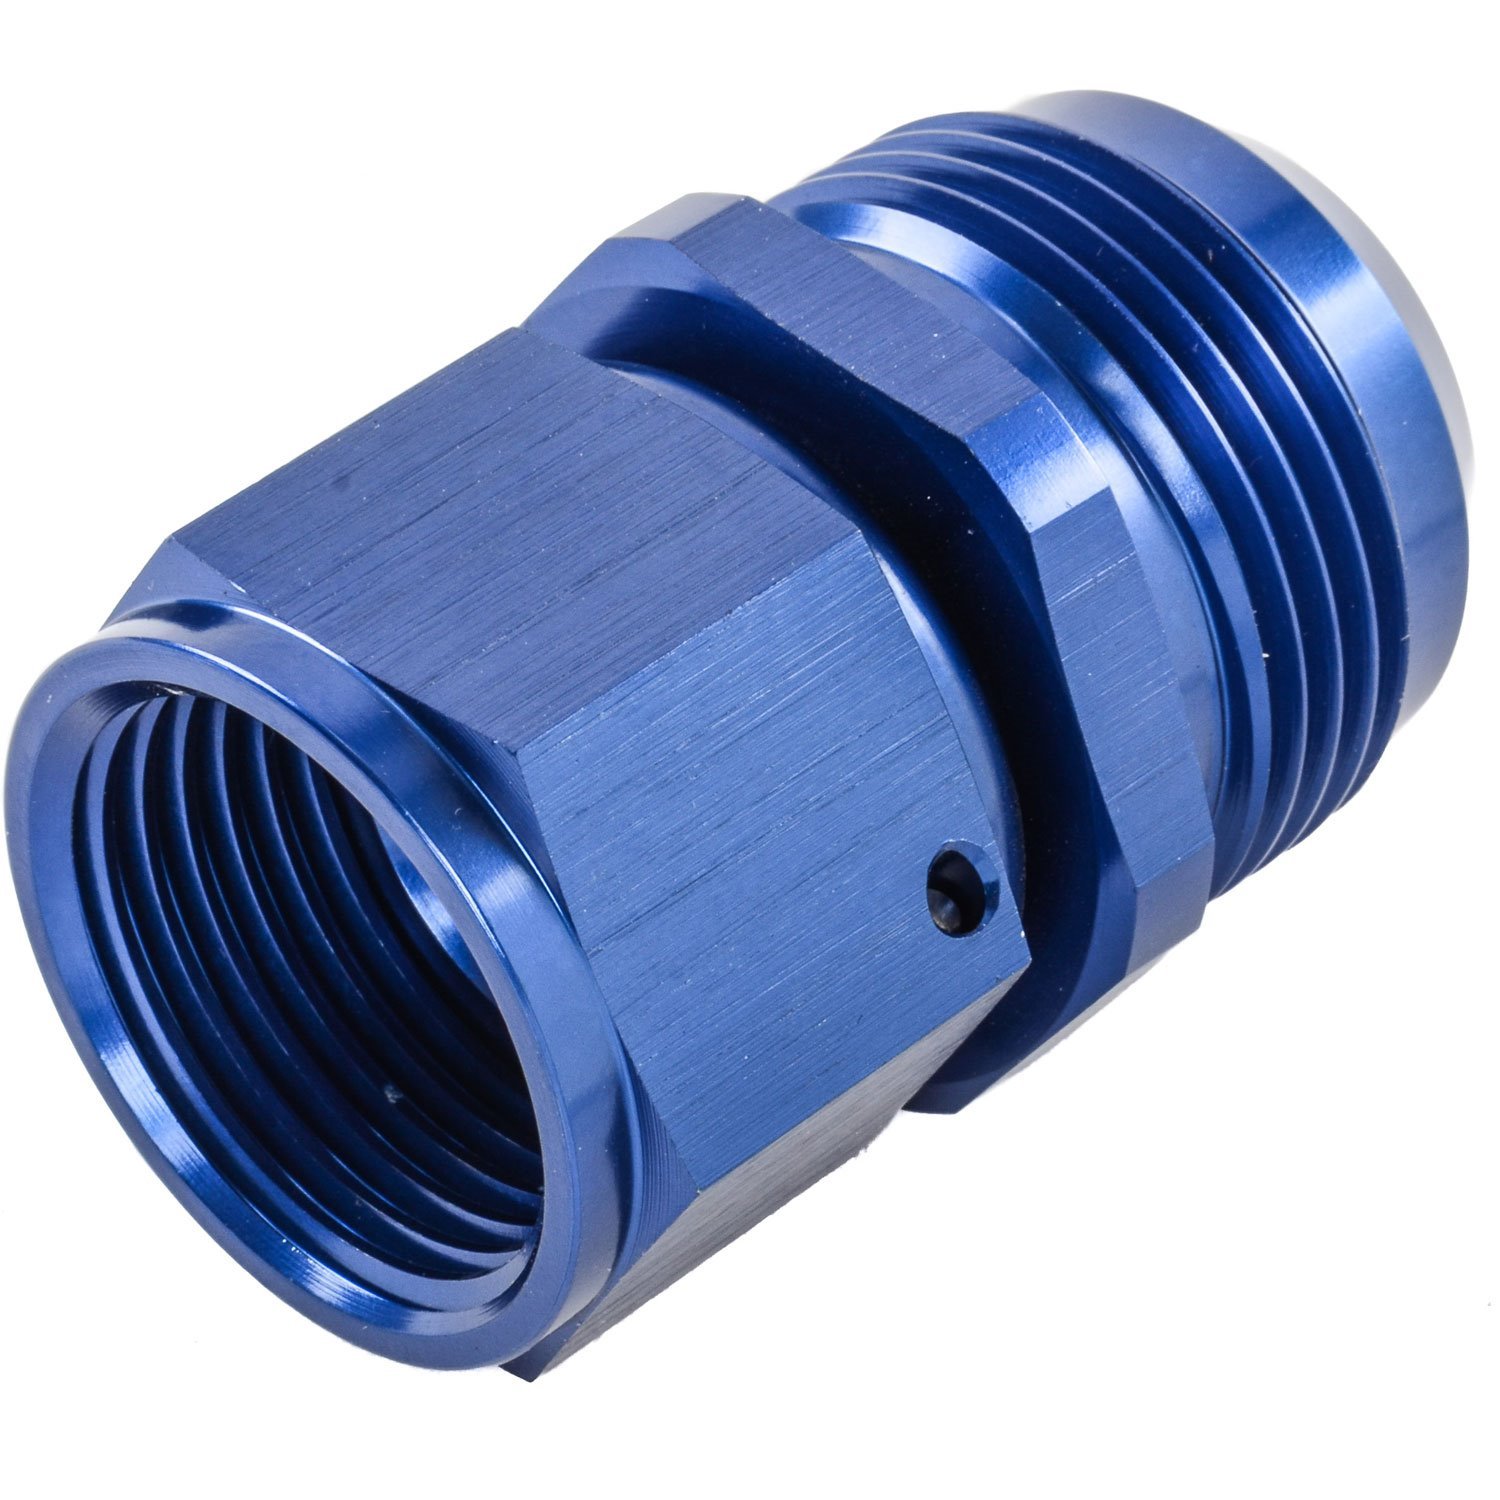 AN Female Swivel to Male Expander Fitting [-12 AN Female to -16 AN Male, Blue Hard Anodized]